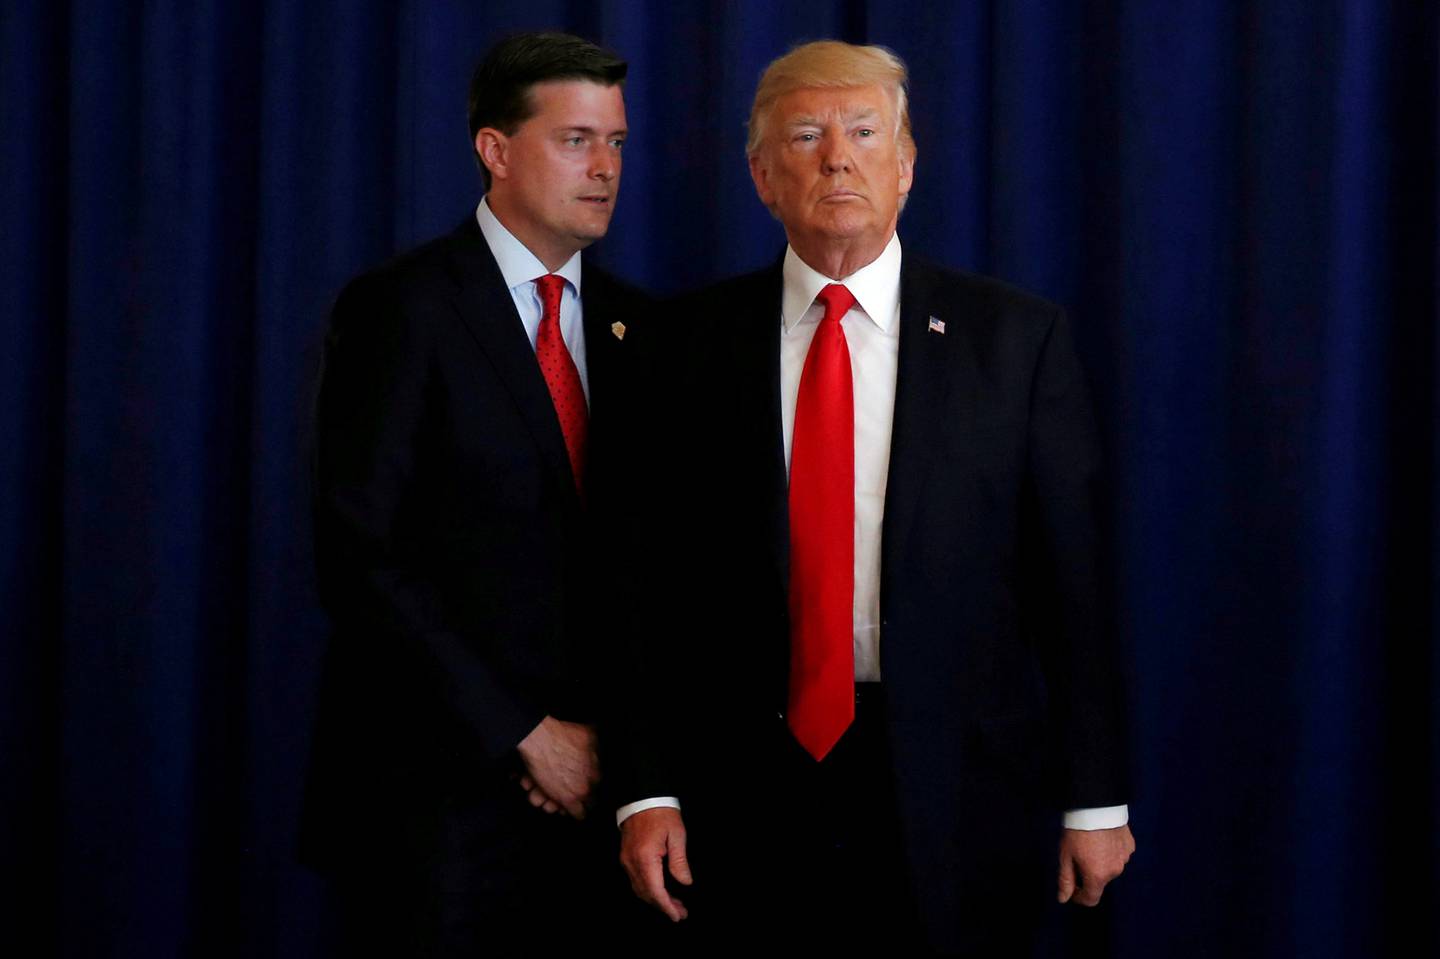 FILE PHOTO: White House Staff Secretary Rob Porter (L) reminds U.S. President Donald Trump he had a bill to sign after he departed quickly following remarks at his golf estate in Bedminster, New Jersey U.S., August 12, 2017.  REUTERS/Jonathan Ernst/File Photo